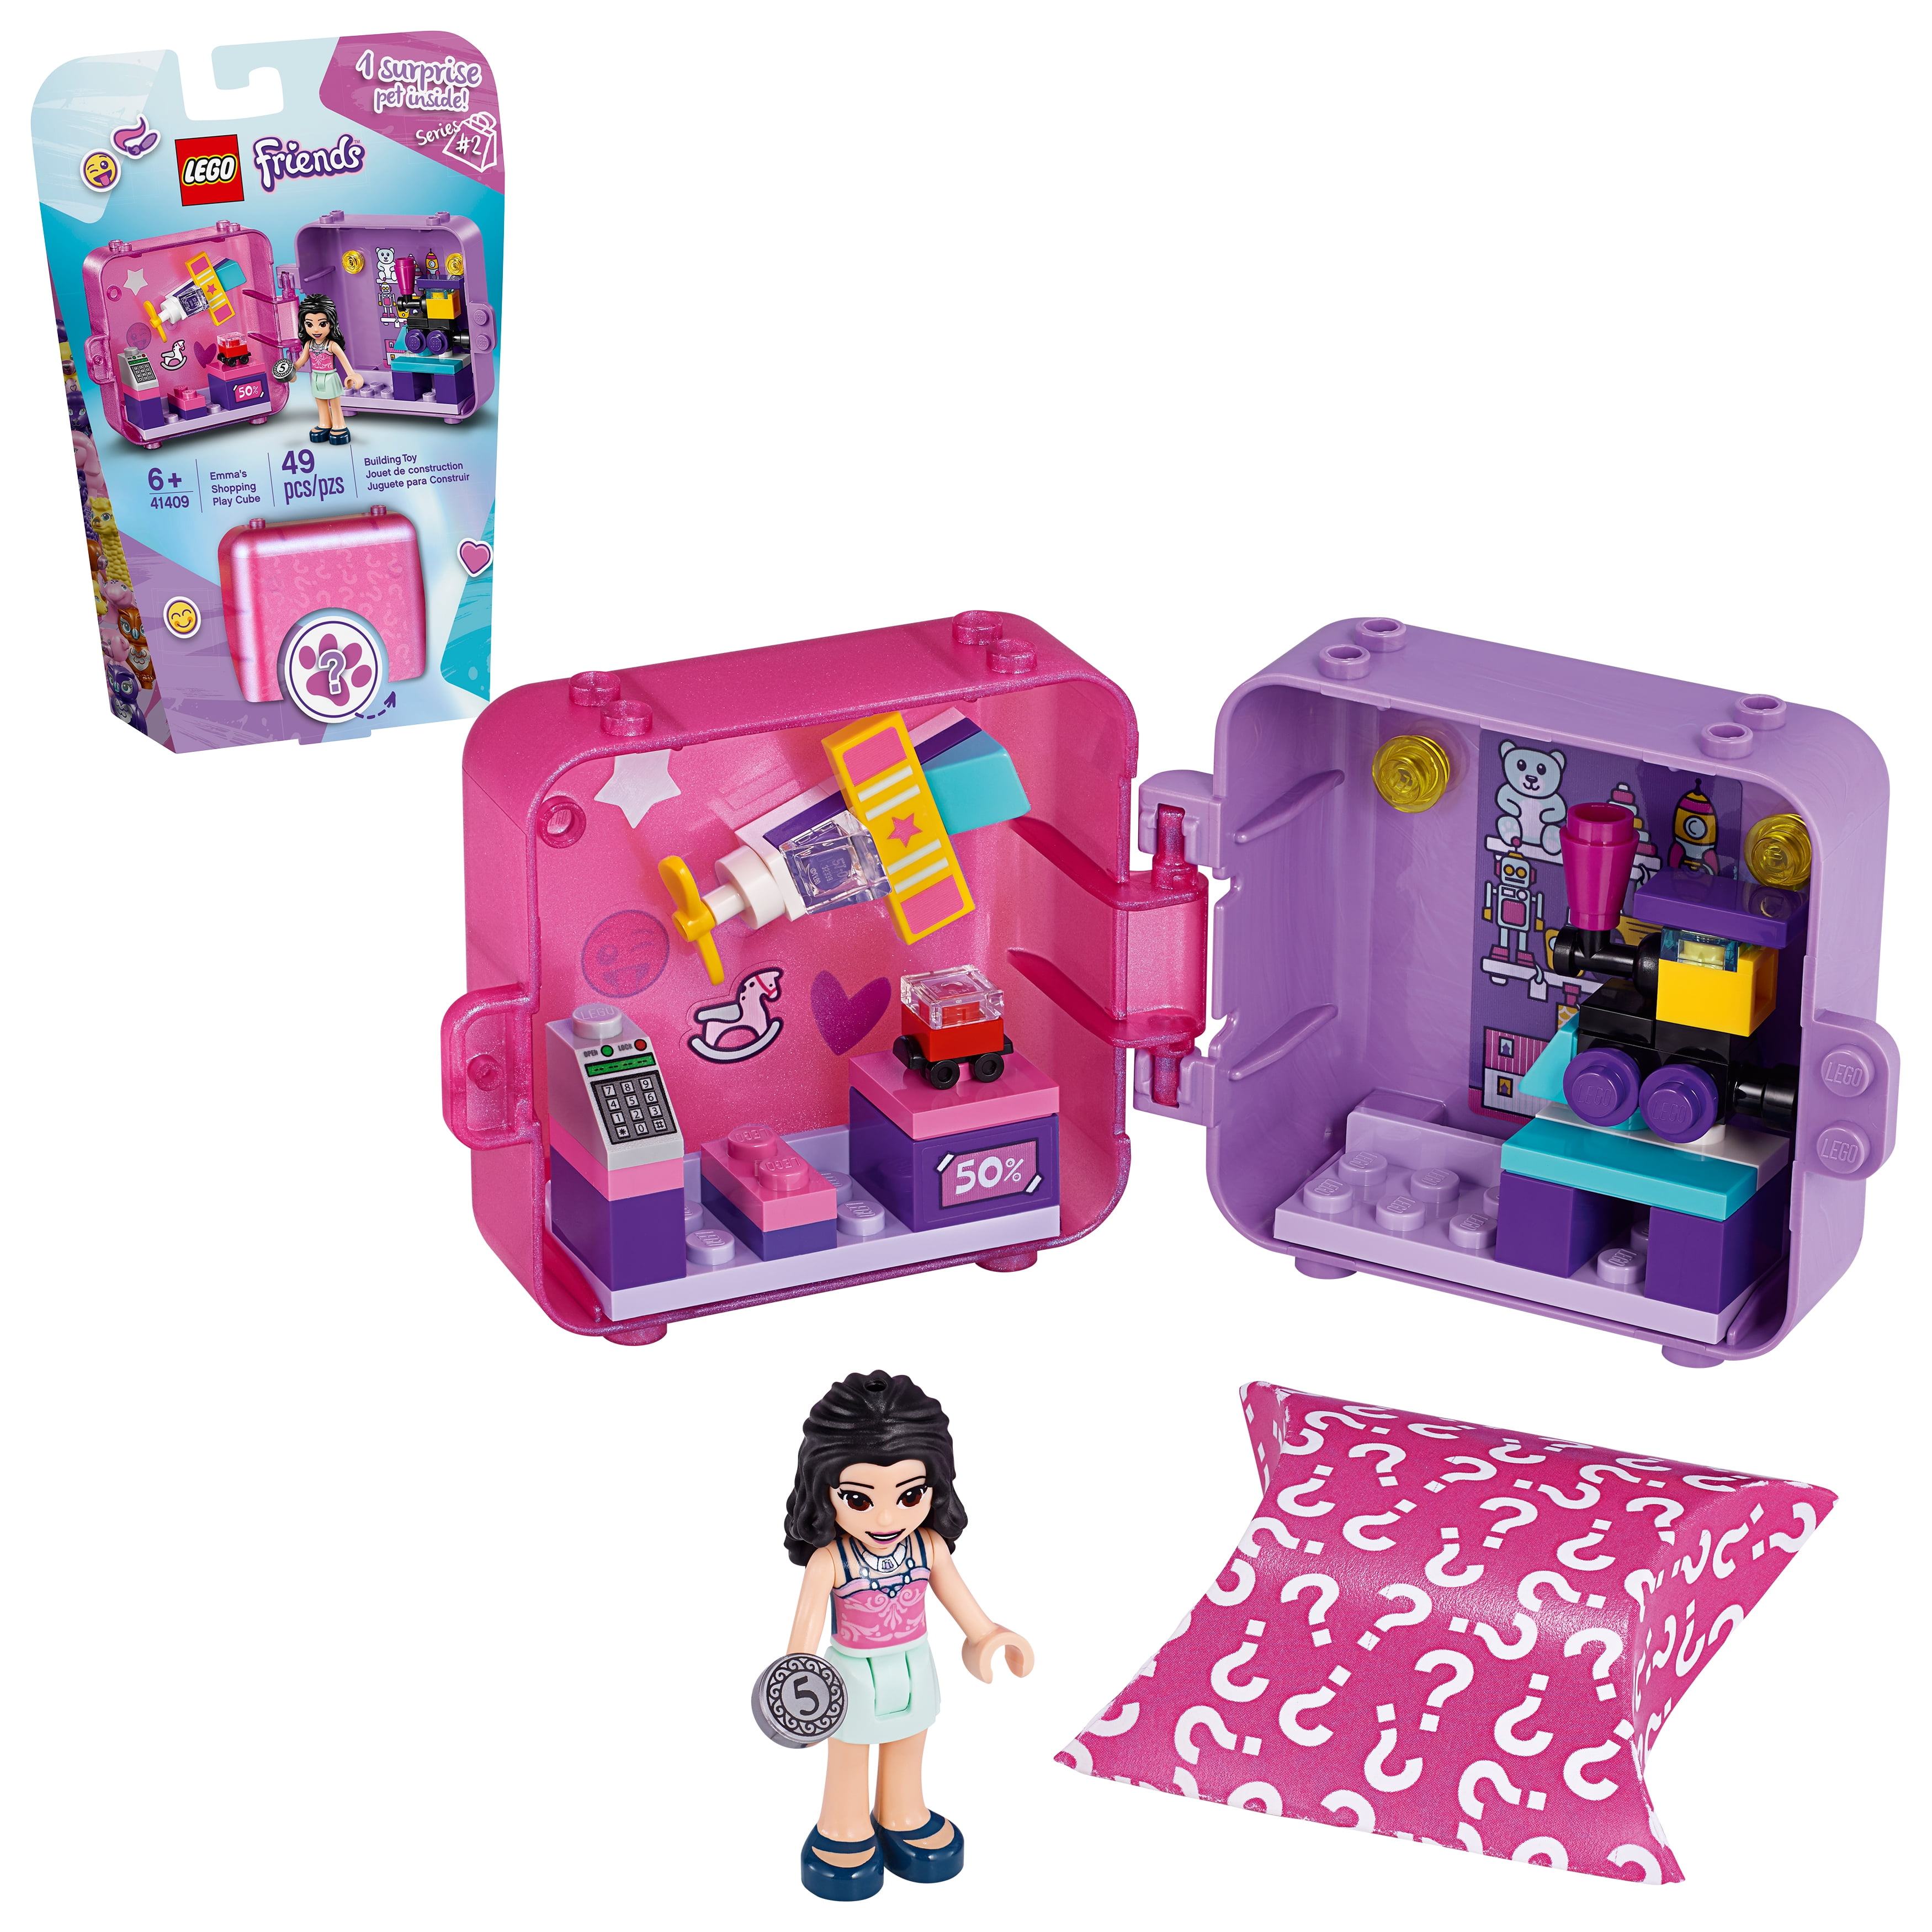 40 Pieces New 2020 LEGO Friends Mia’s Play Cube 41403 Building Kit Playset Includes Collectible Mini-Doll for Imaginative Play